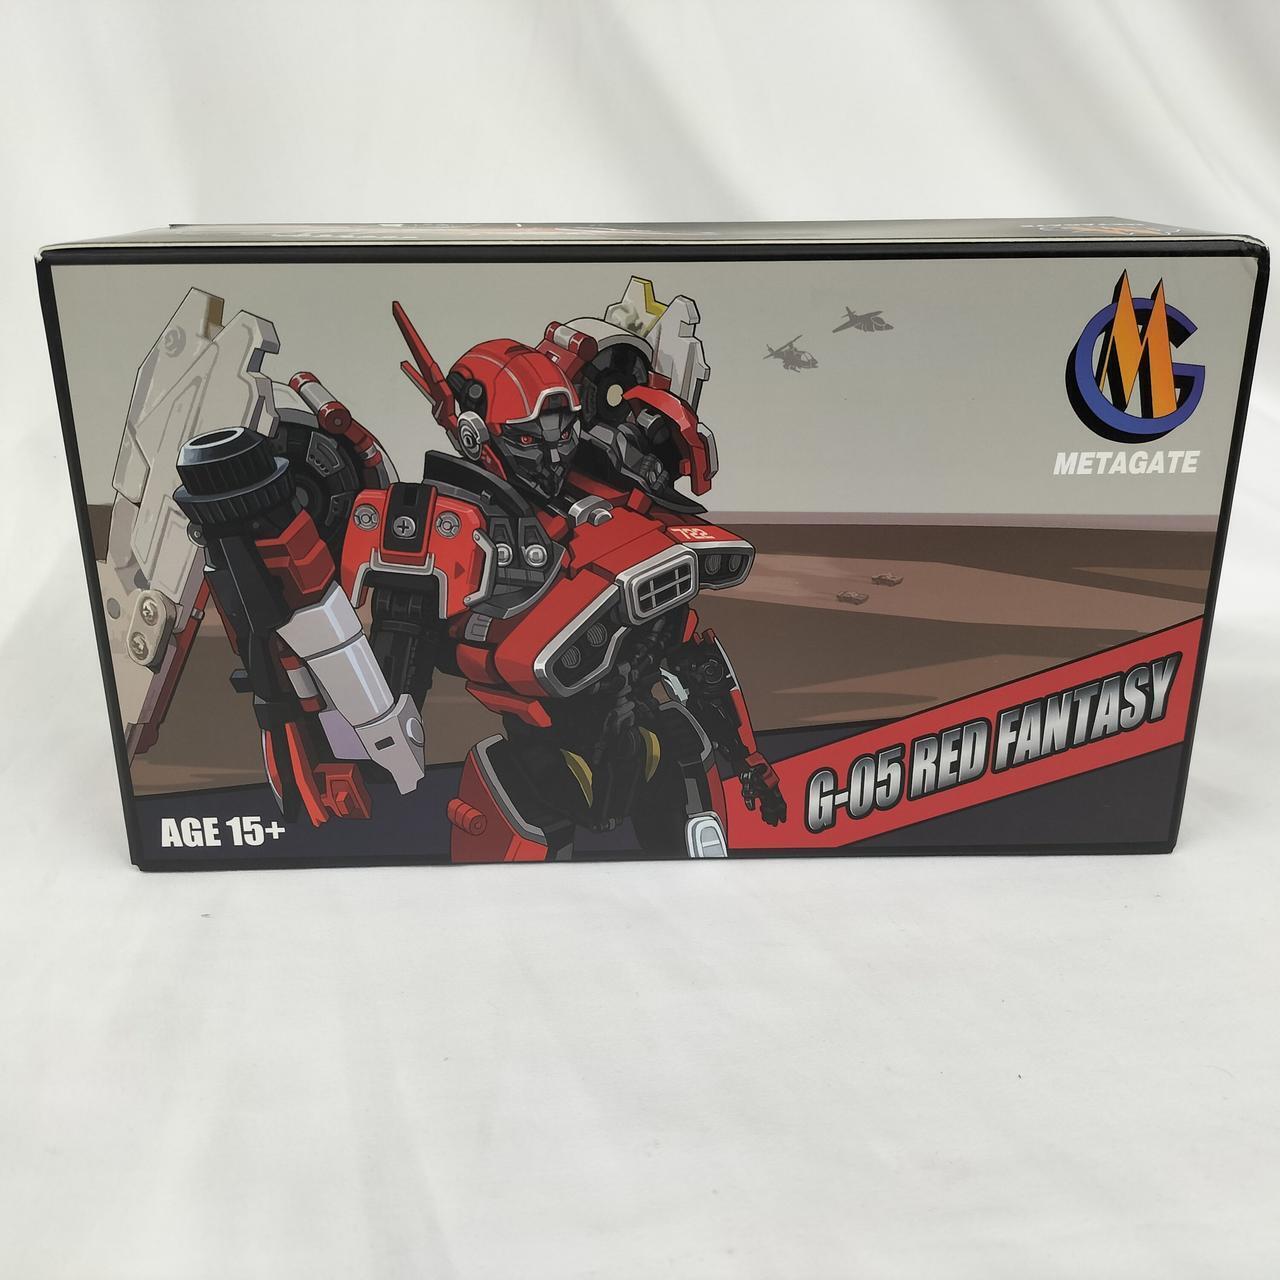 Metagate G-05 Red Fantasy Action Figure 0630-35